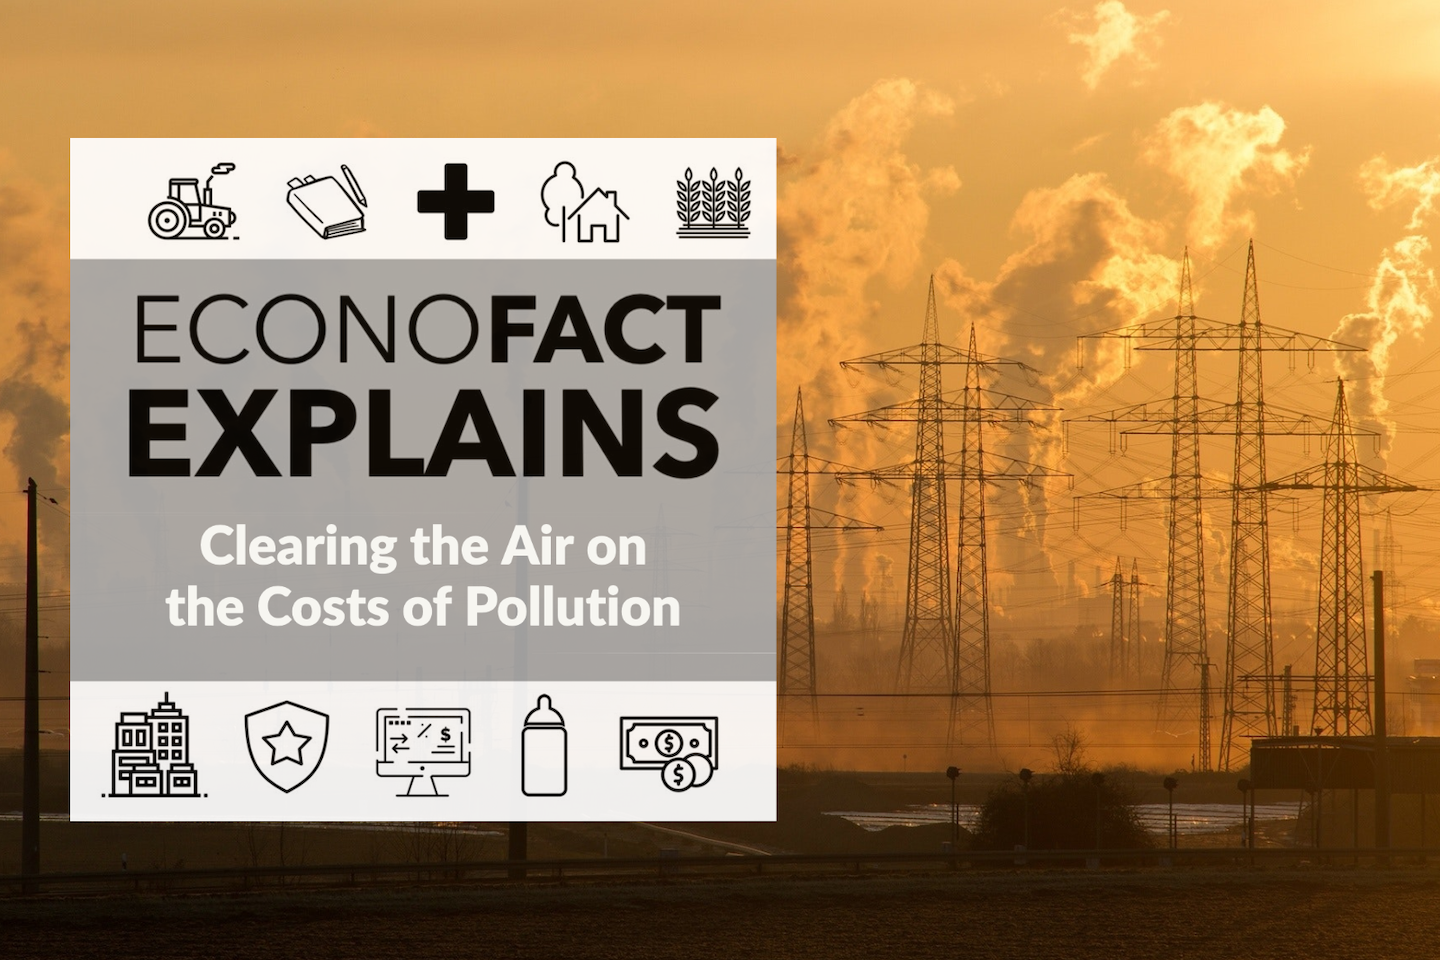 Clearing the Air on the Costs of Pollution